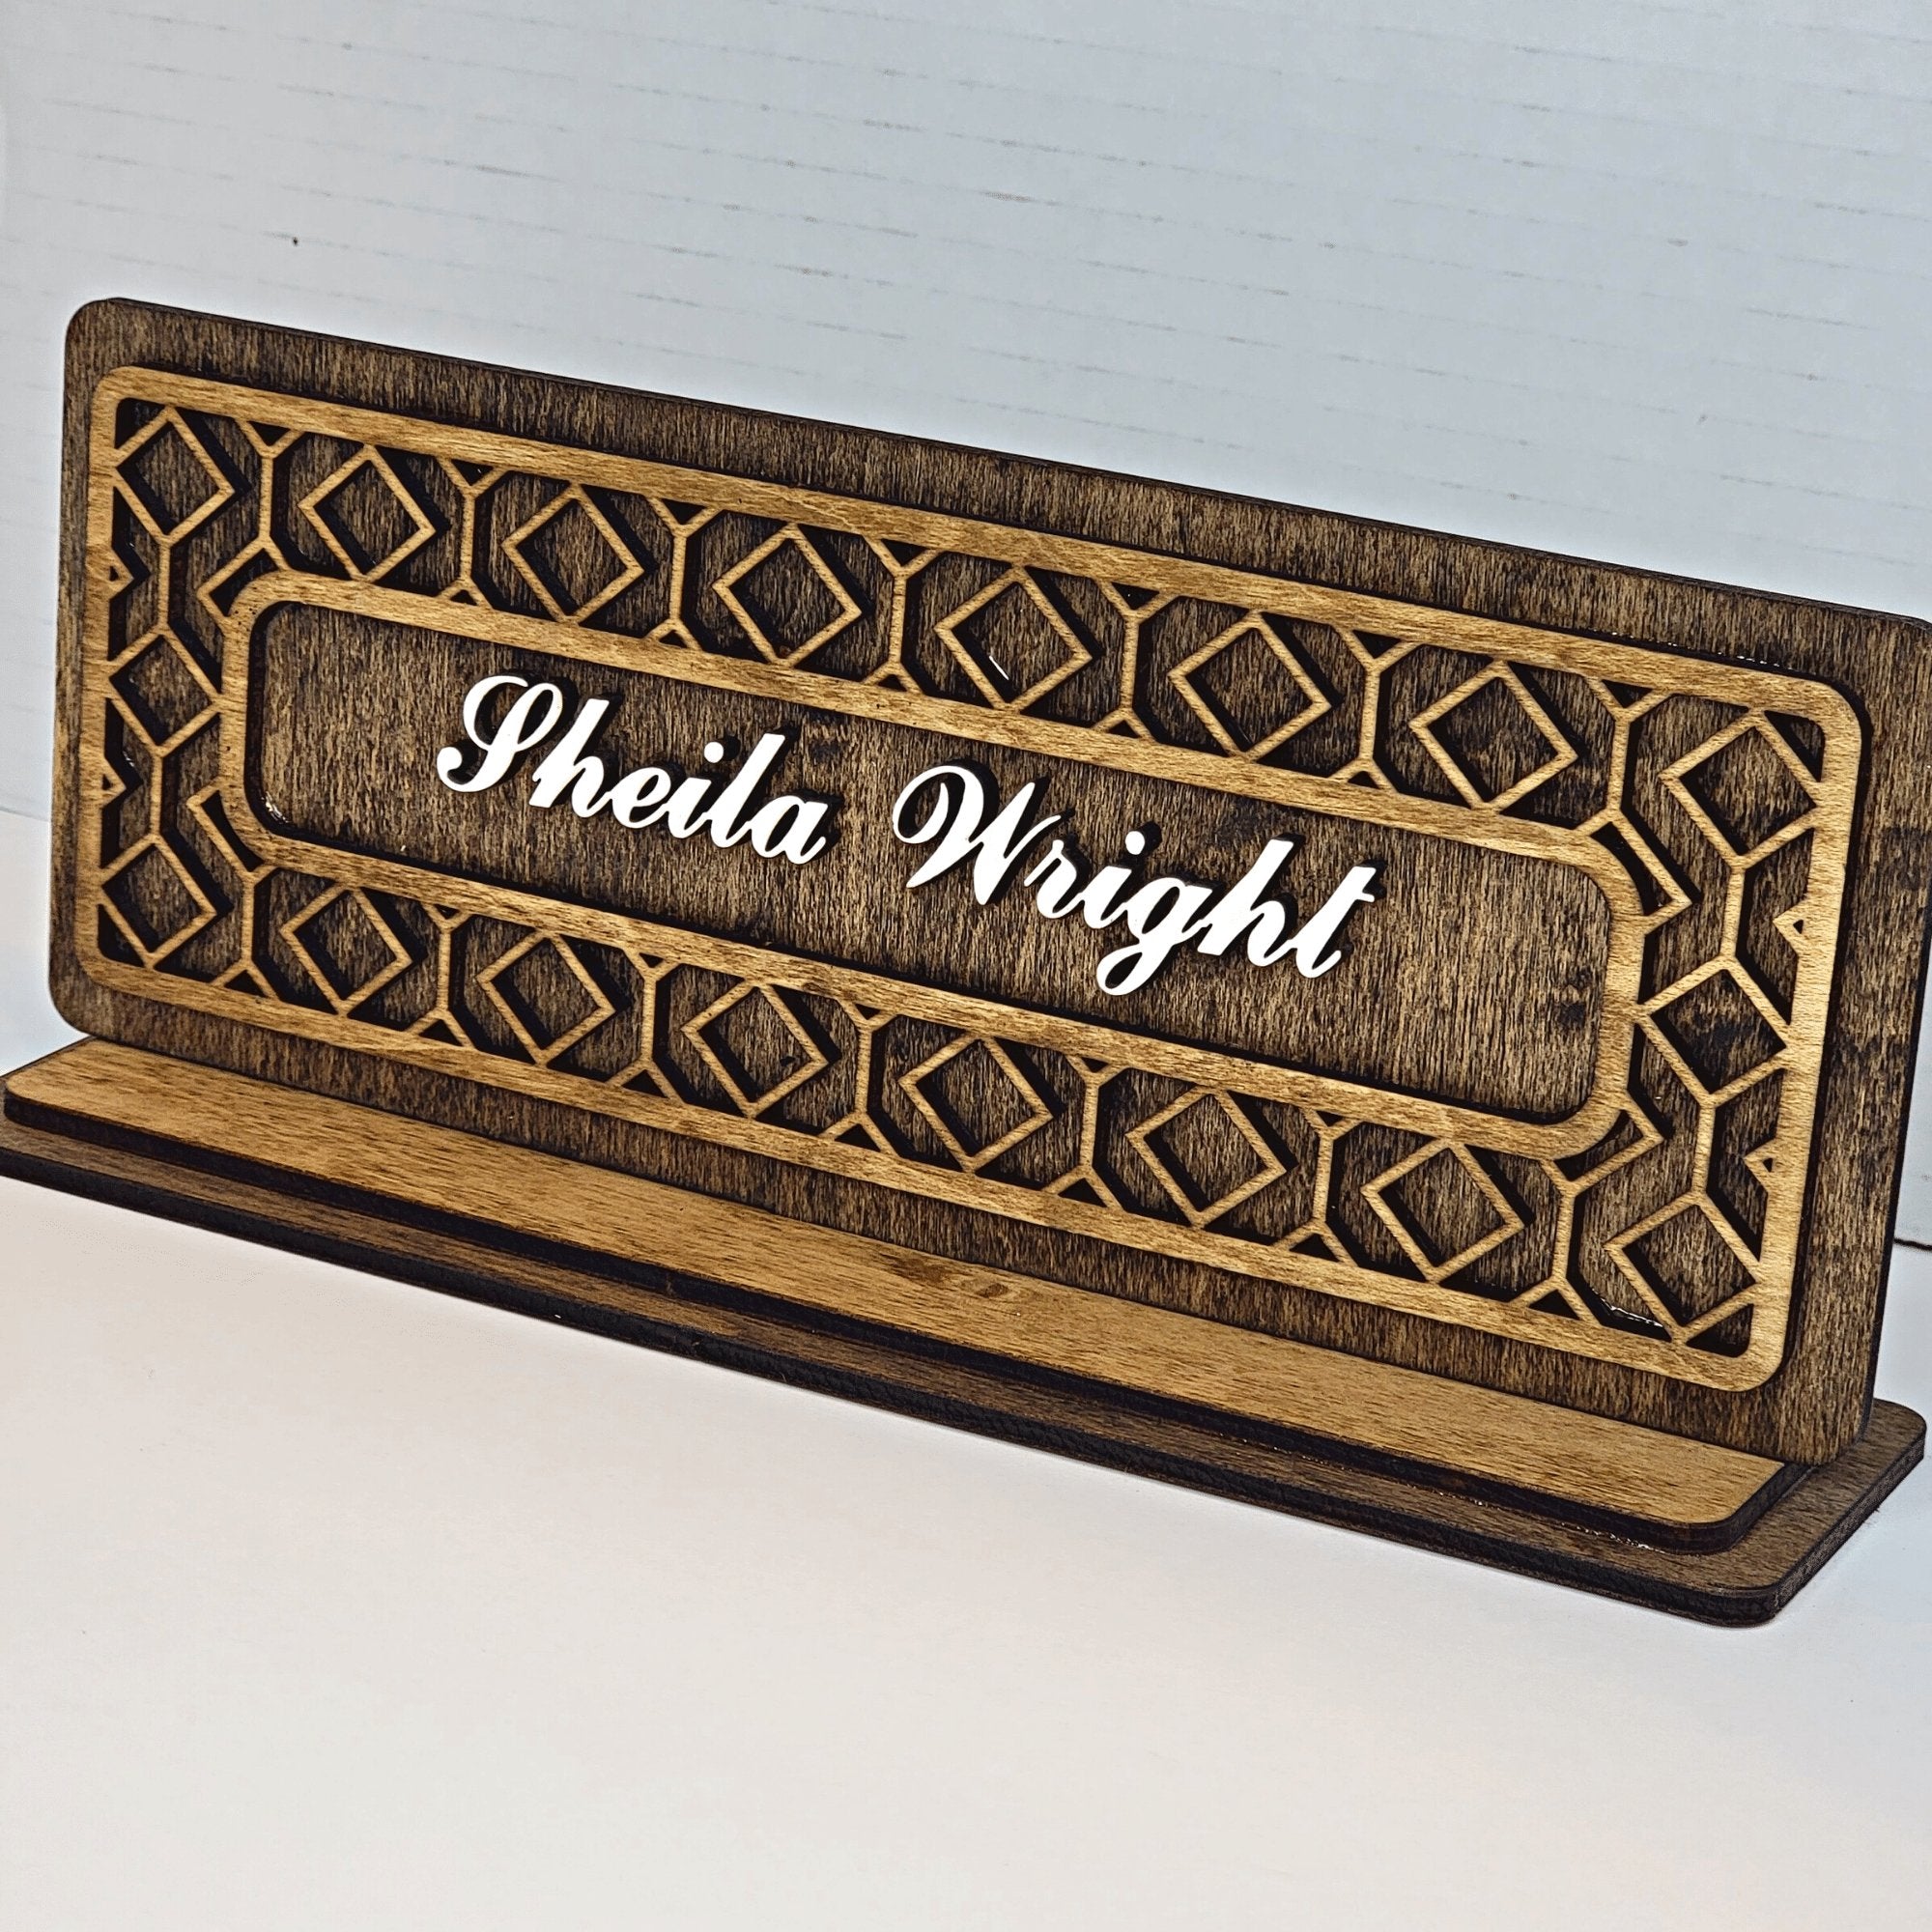 Personalized Wood Desk Name Plate Stand - Designodeal